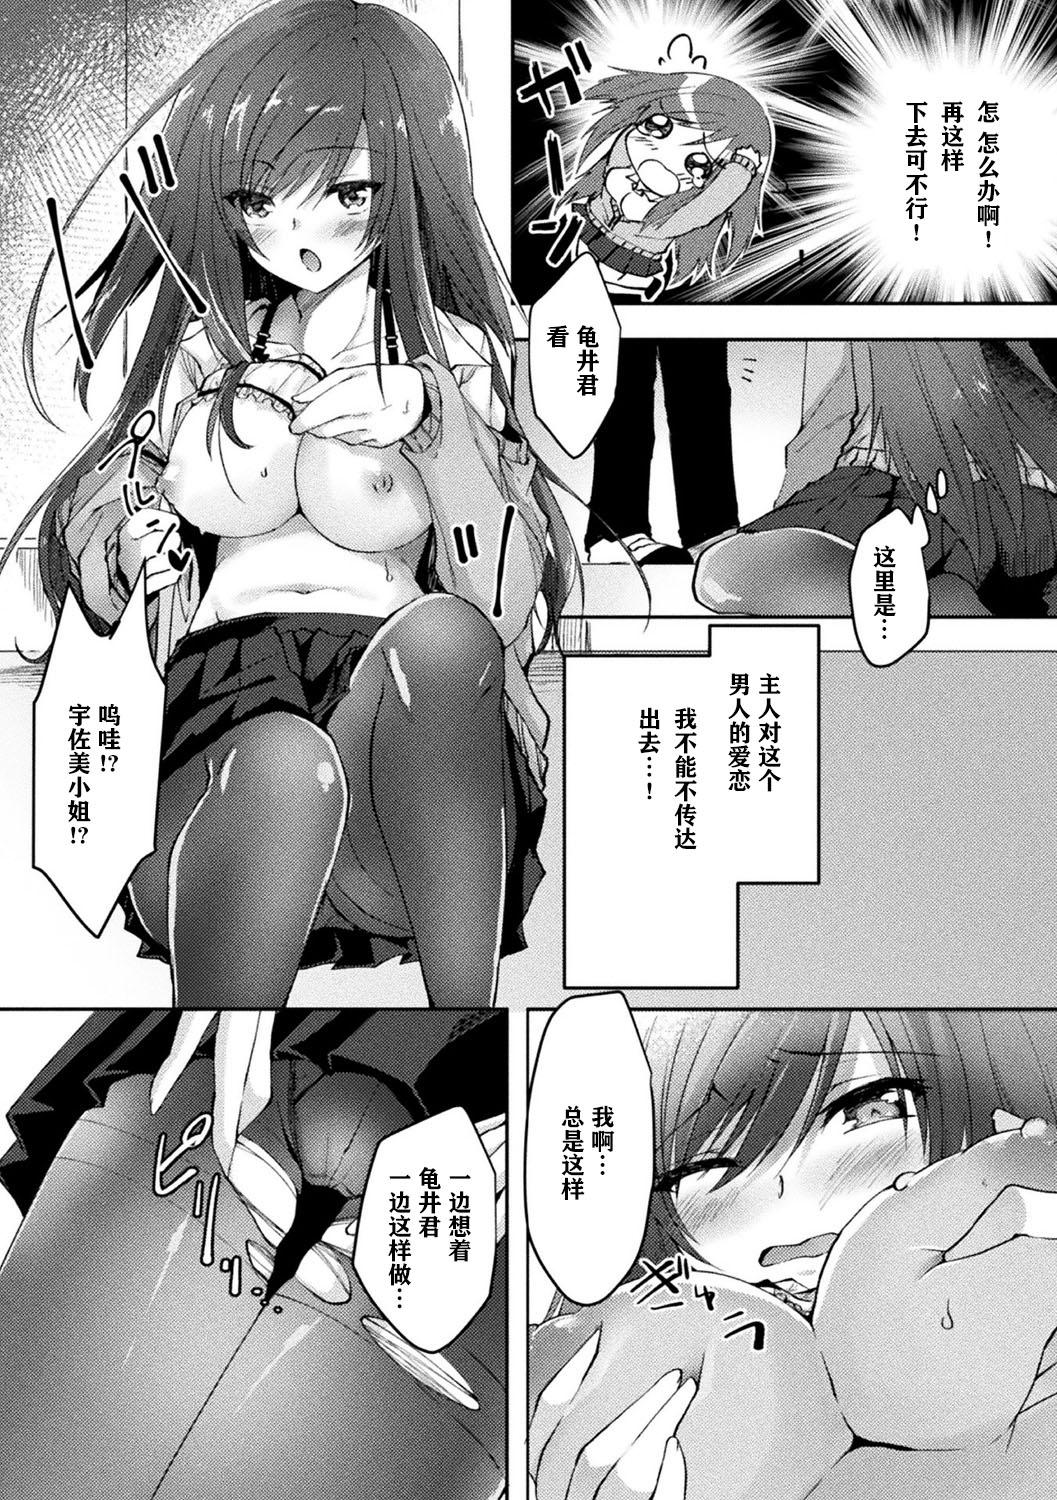 COMIC Unreal Transforming Into Another Person and Spoofing Temptation Vol.1 [Digital][Chinese]【不可视汉化】 55